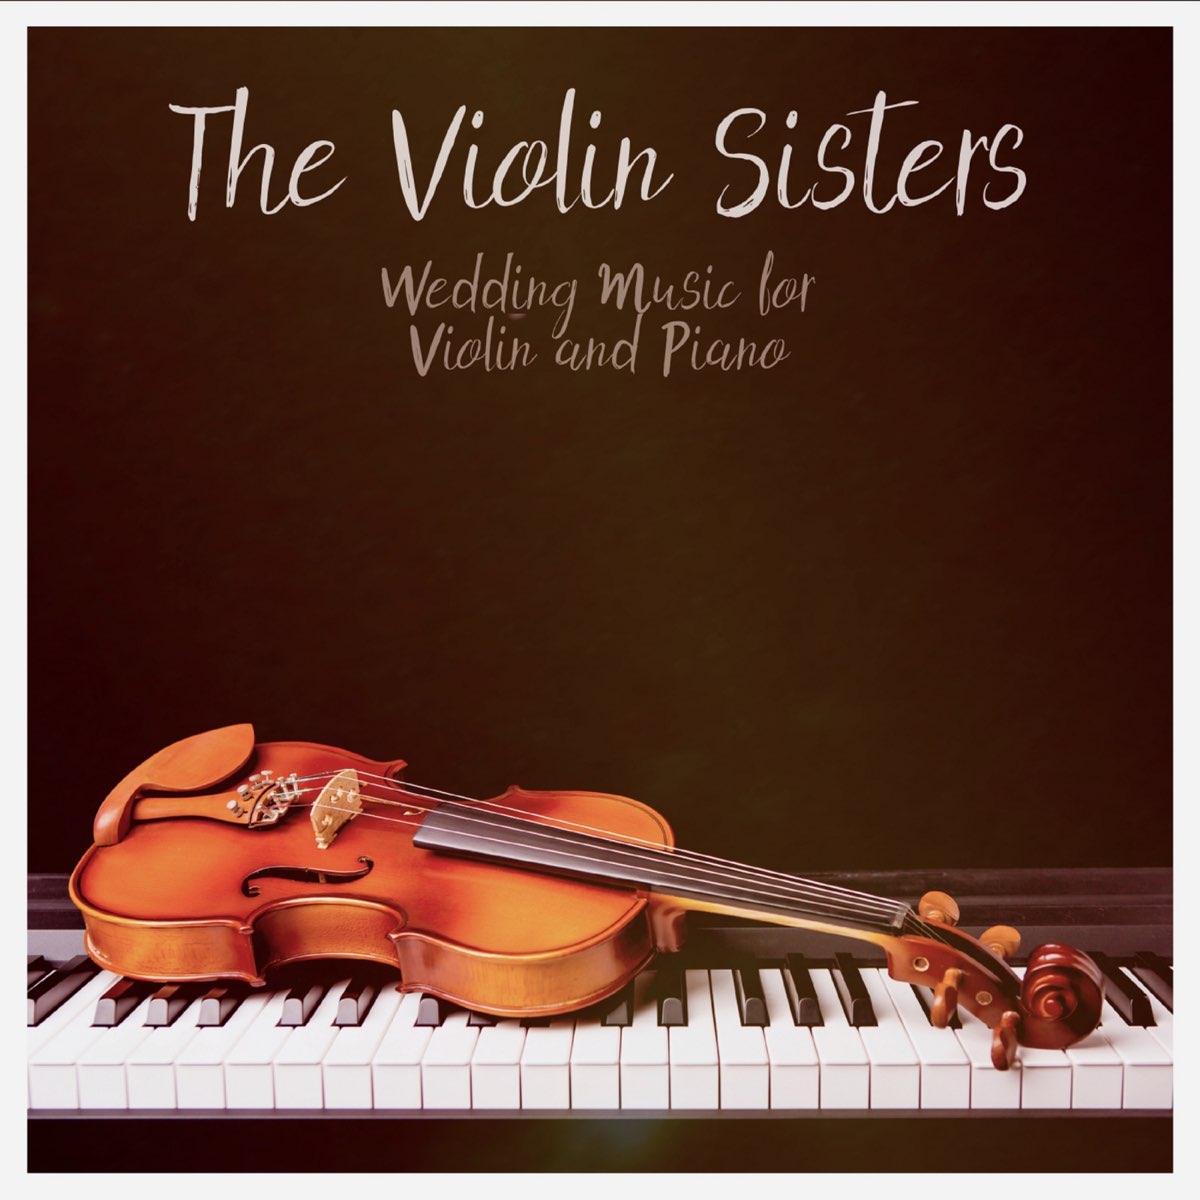 Wedding Music for Violin and Piano by The Violin Sisters on Apple Music